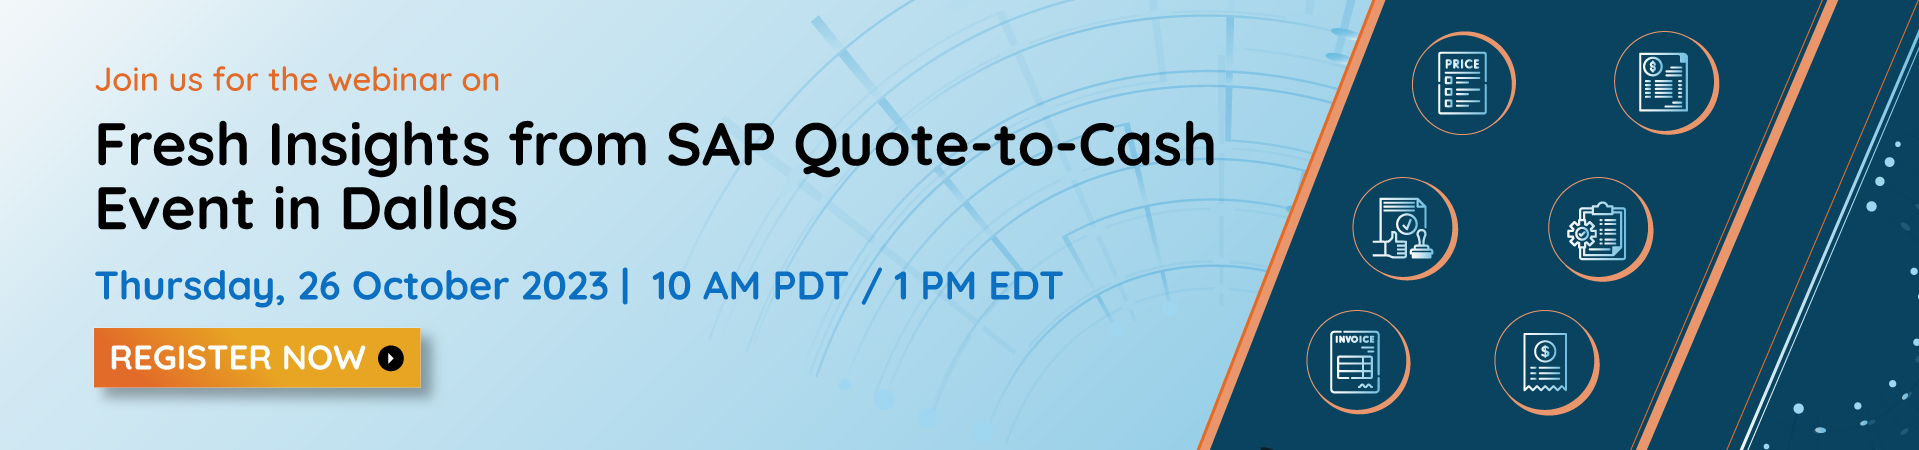 Fresh Insights from SAP Quote-to-Cash Event in Dallas, Online Event